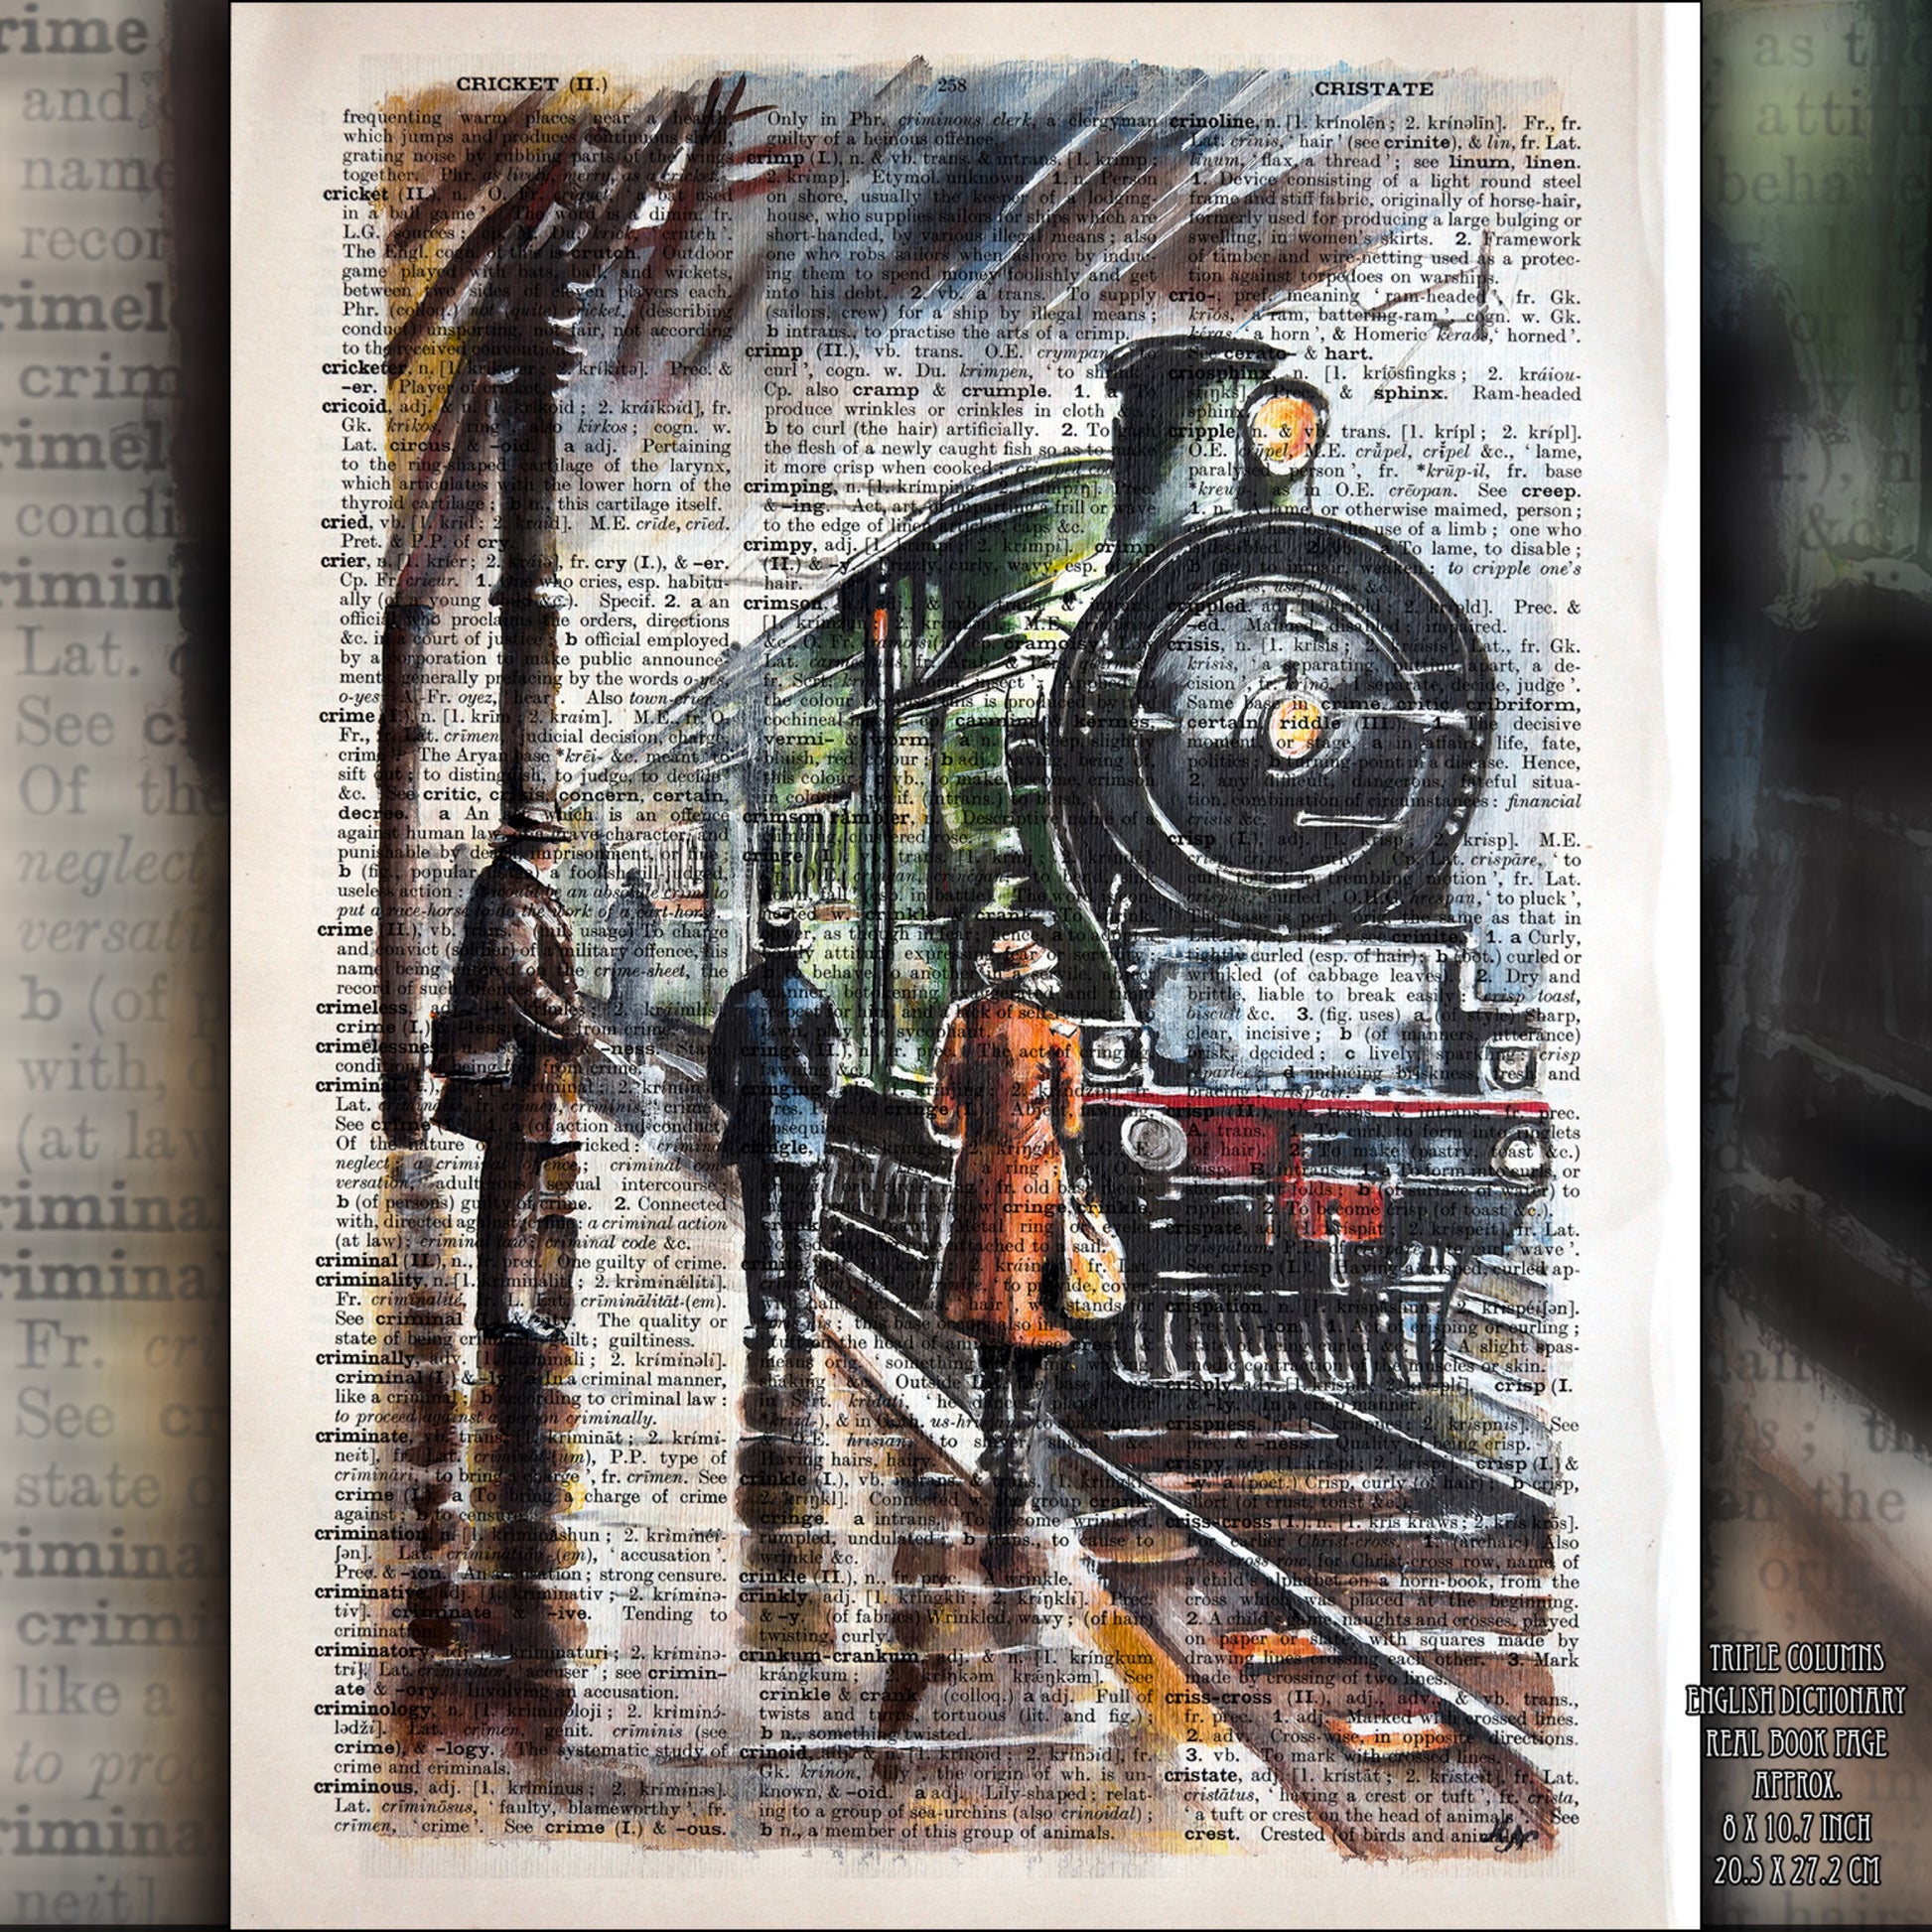 Digital art "Age of Steam" by Misty Lady, featuring a steam train and diverse people at a station on a vintage dictionary page.